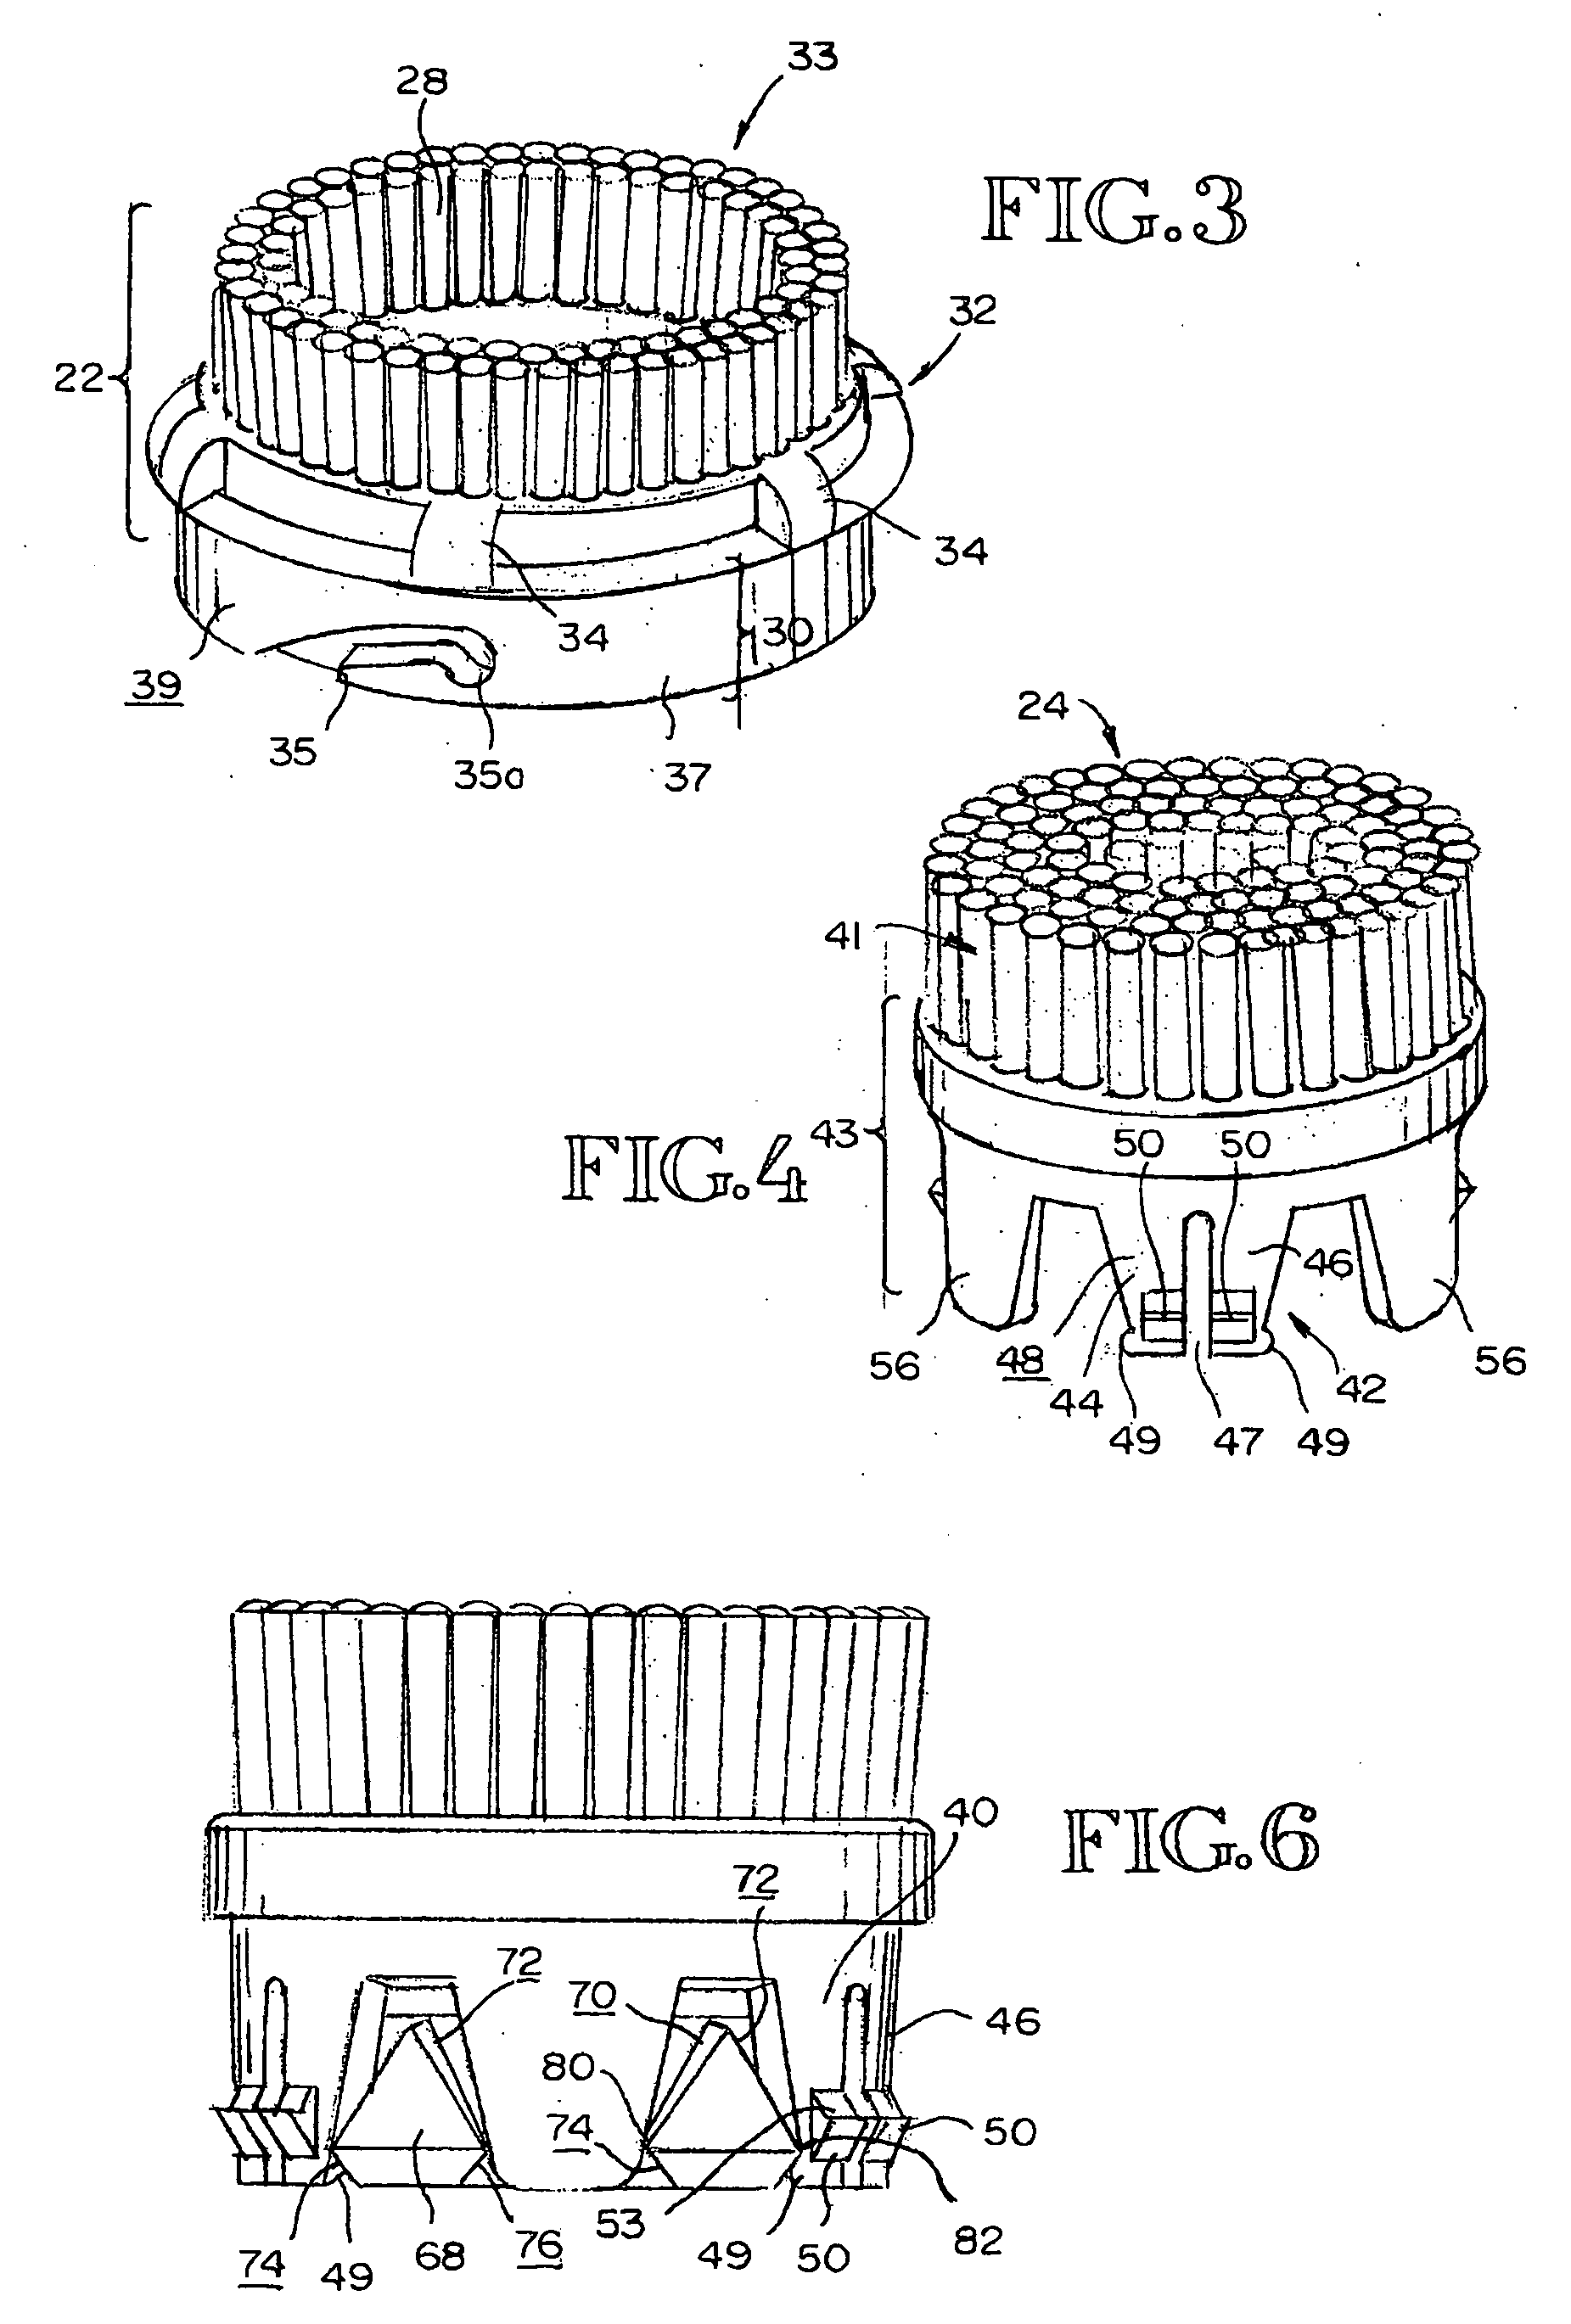 Oscillating brushhead attachment system for a personal care appliance